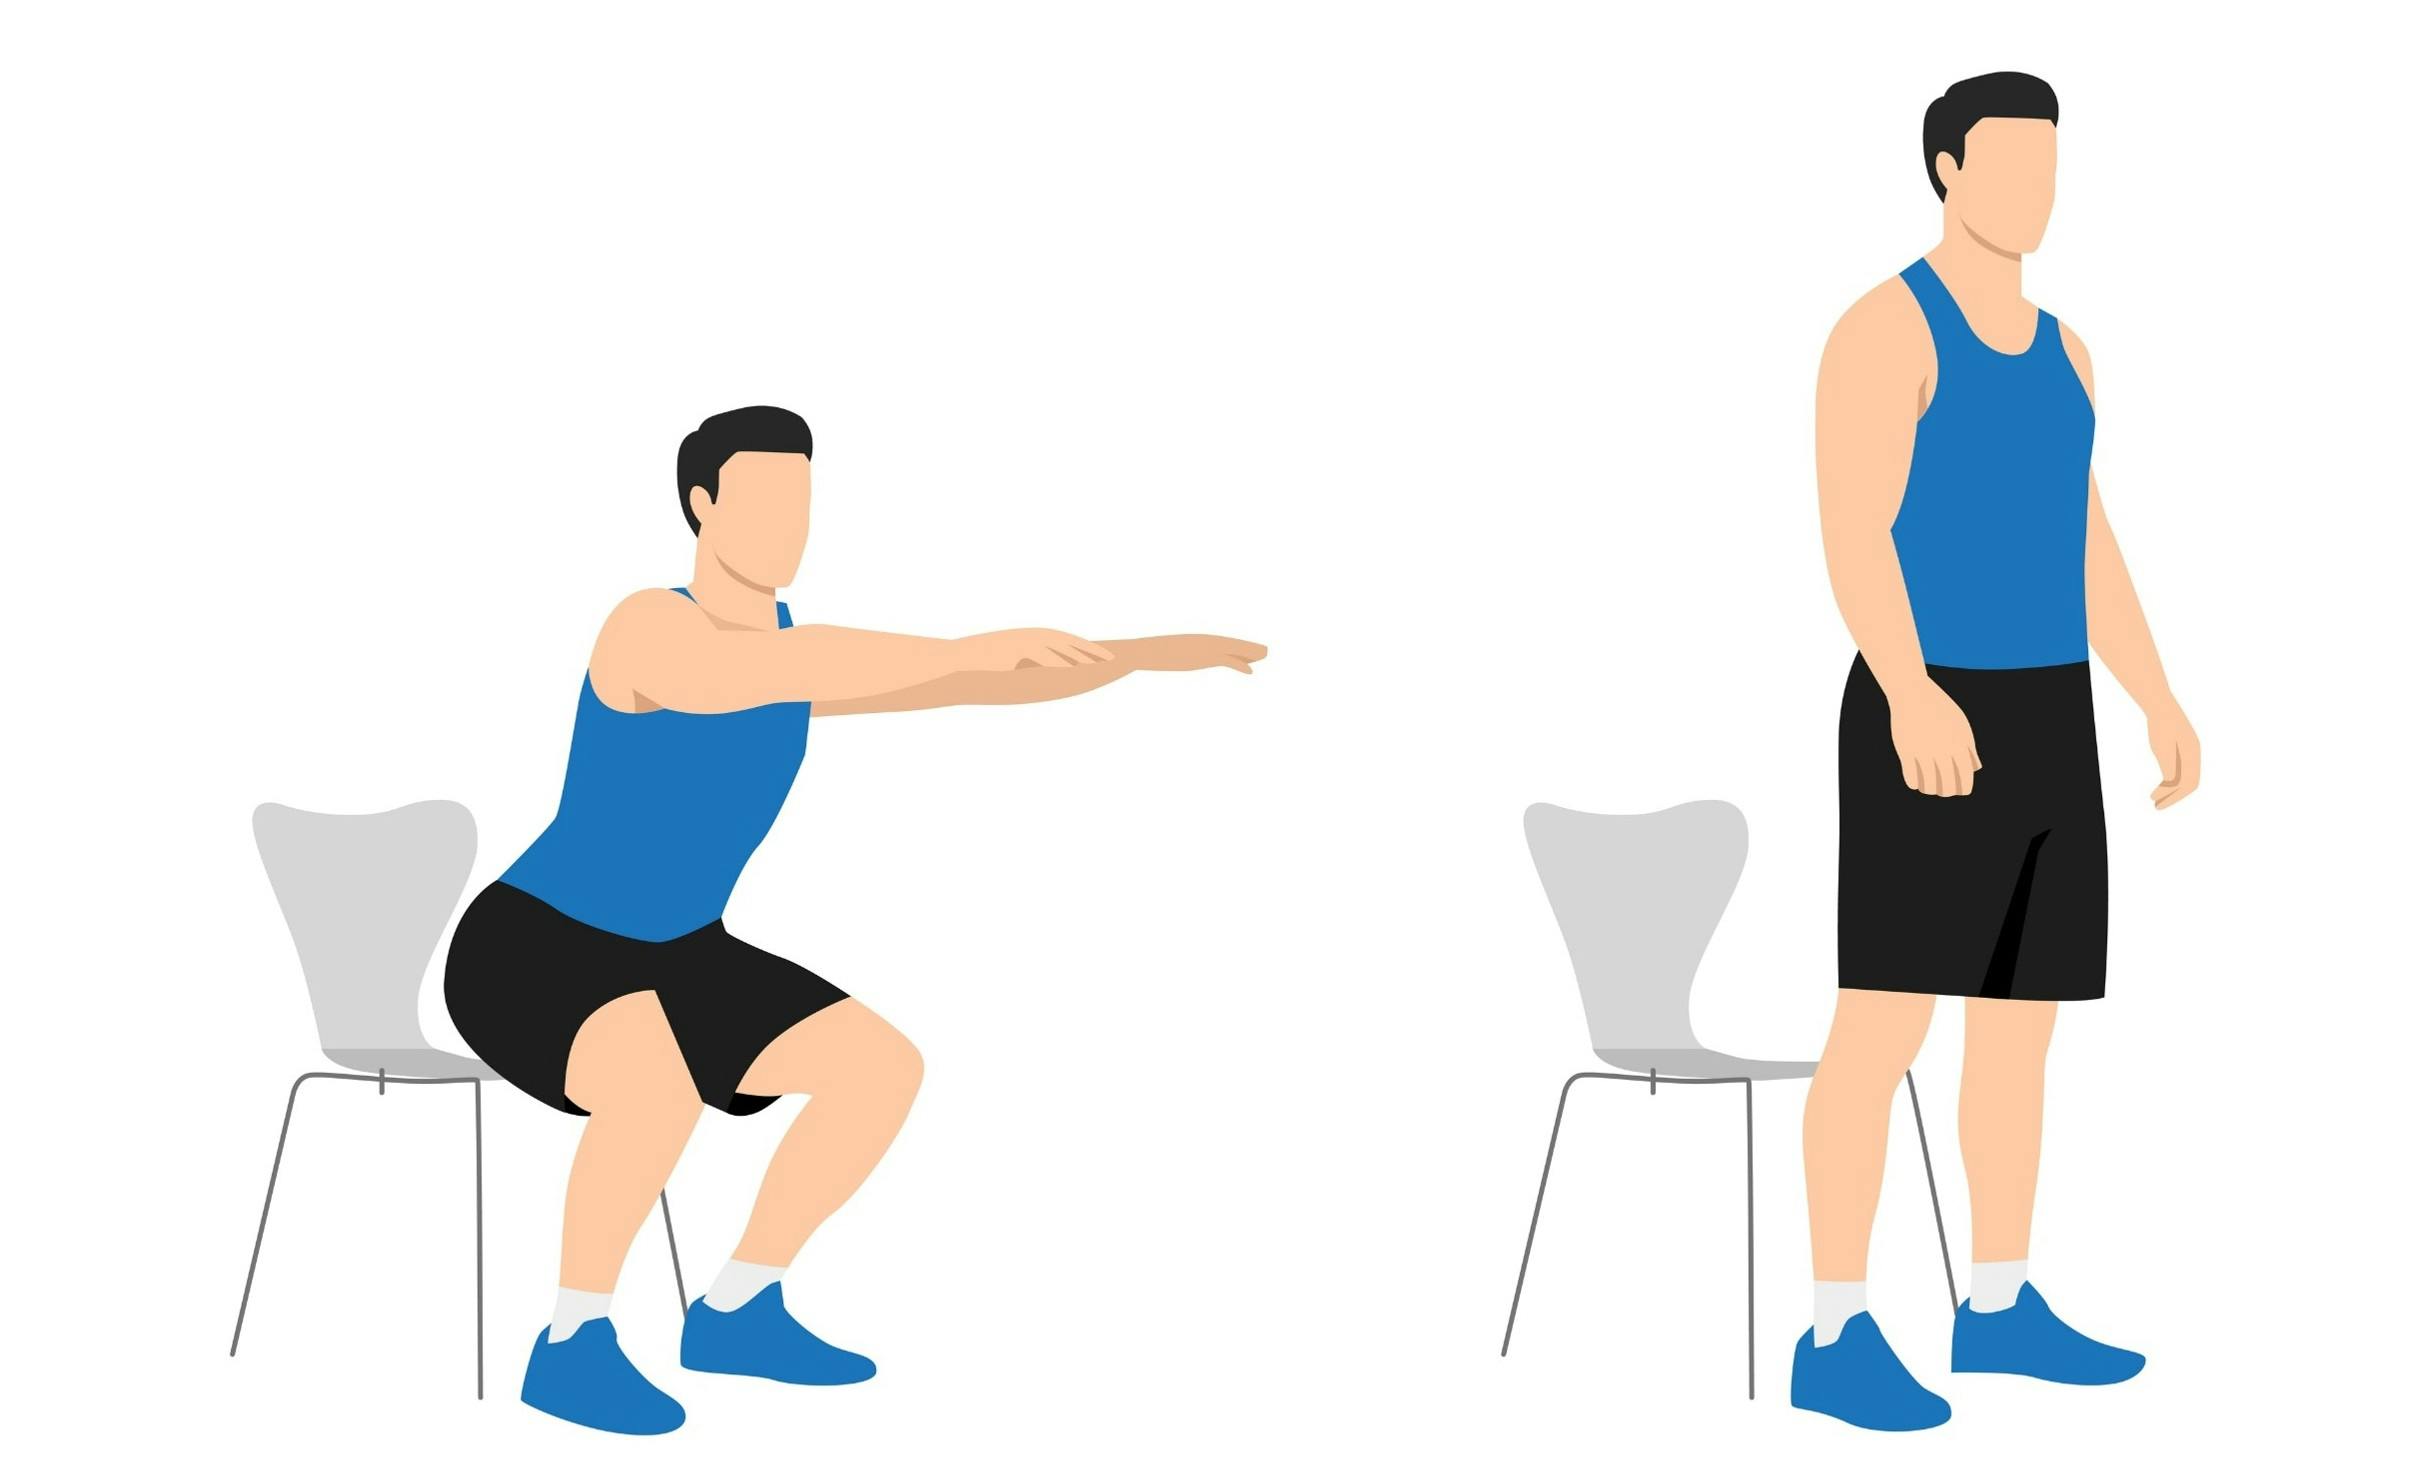 Squat to chair or bench exercise illustration